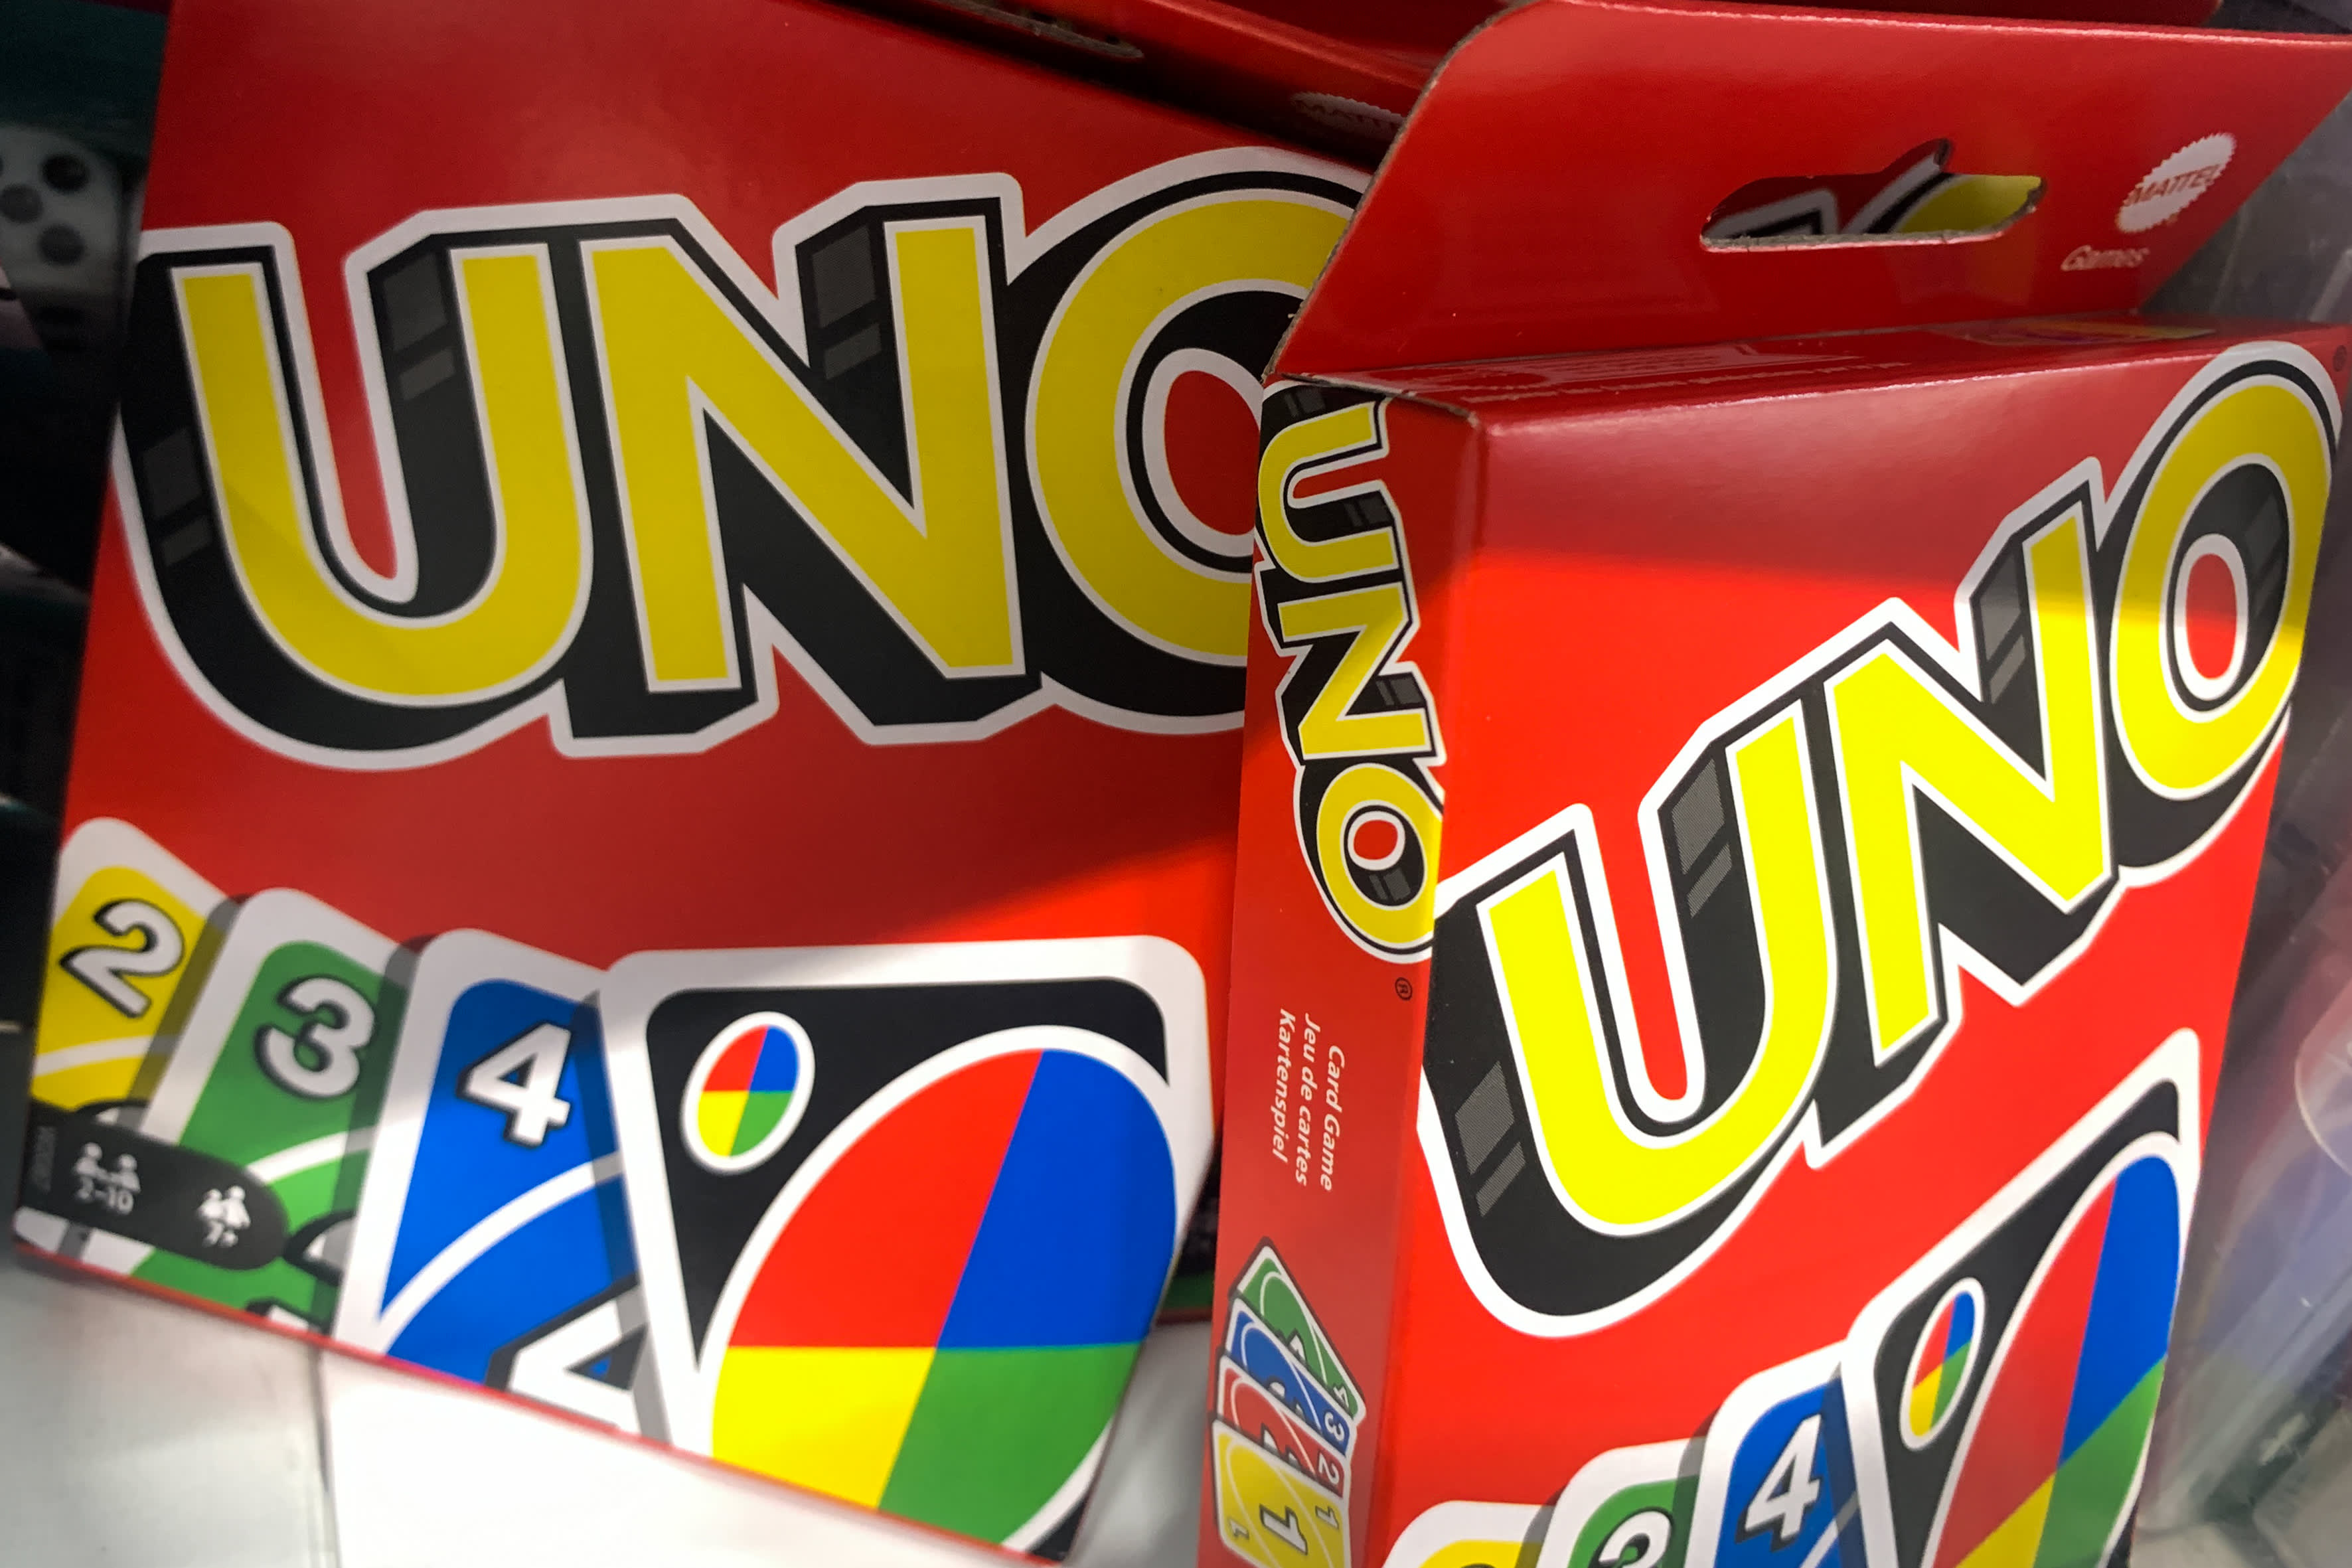 You can now earn more than $4,000 a WEEK playing UNO - as Mattel recruits  for a very unique job opening